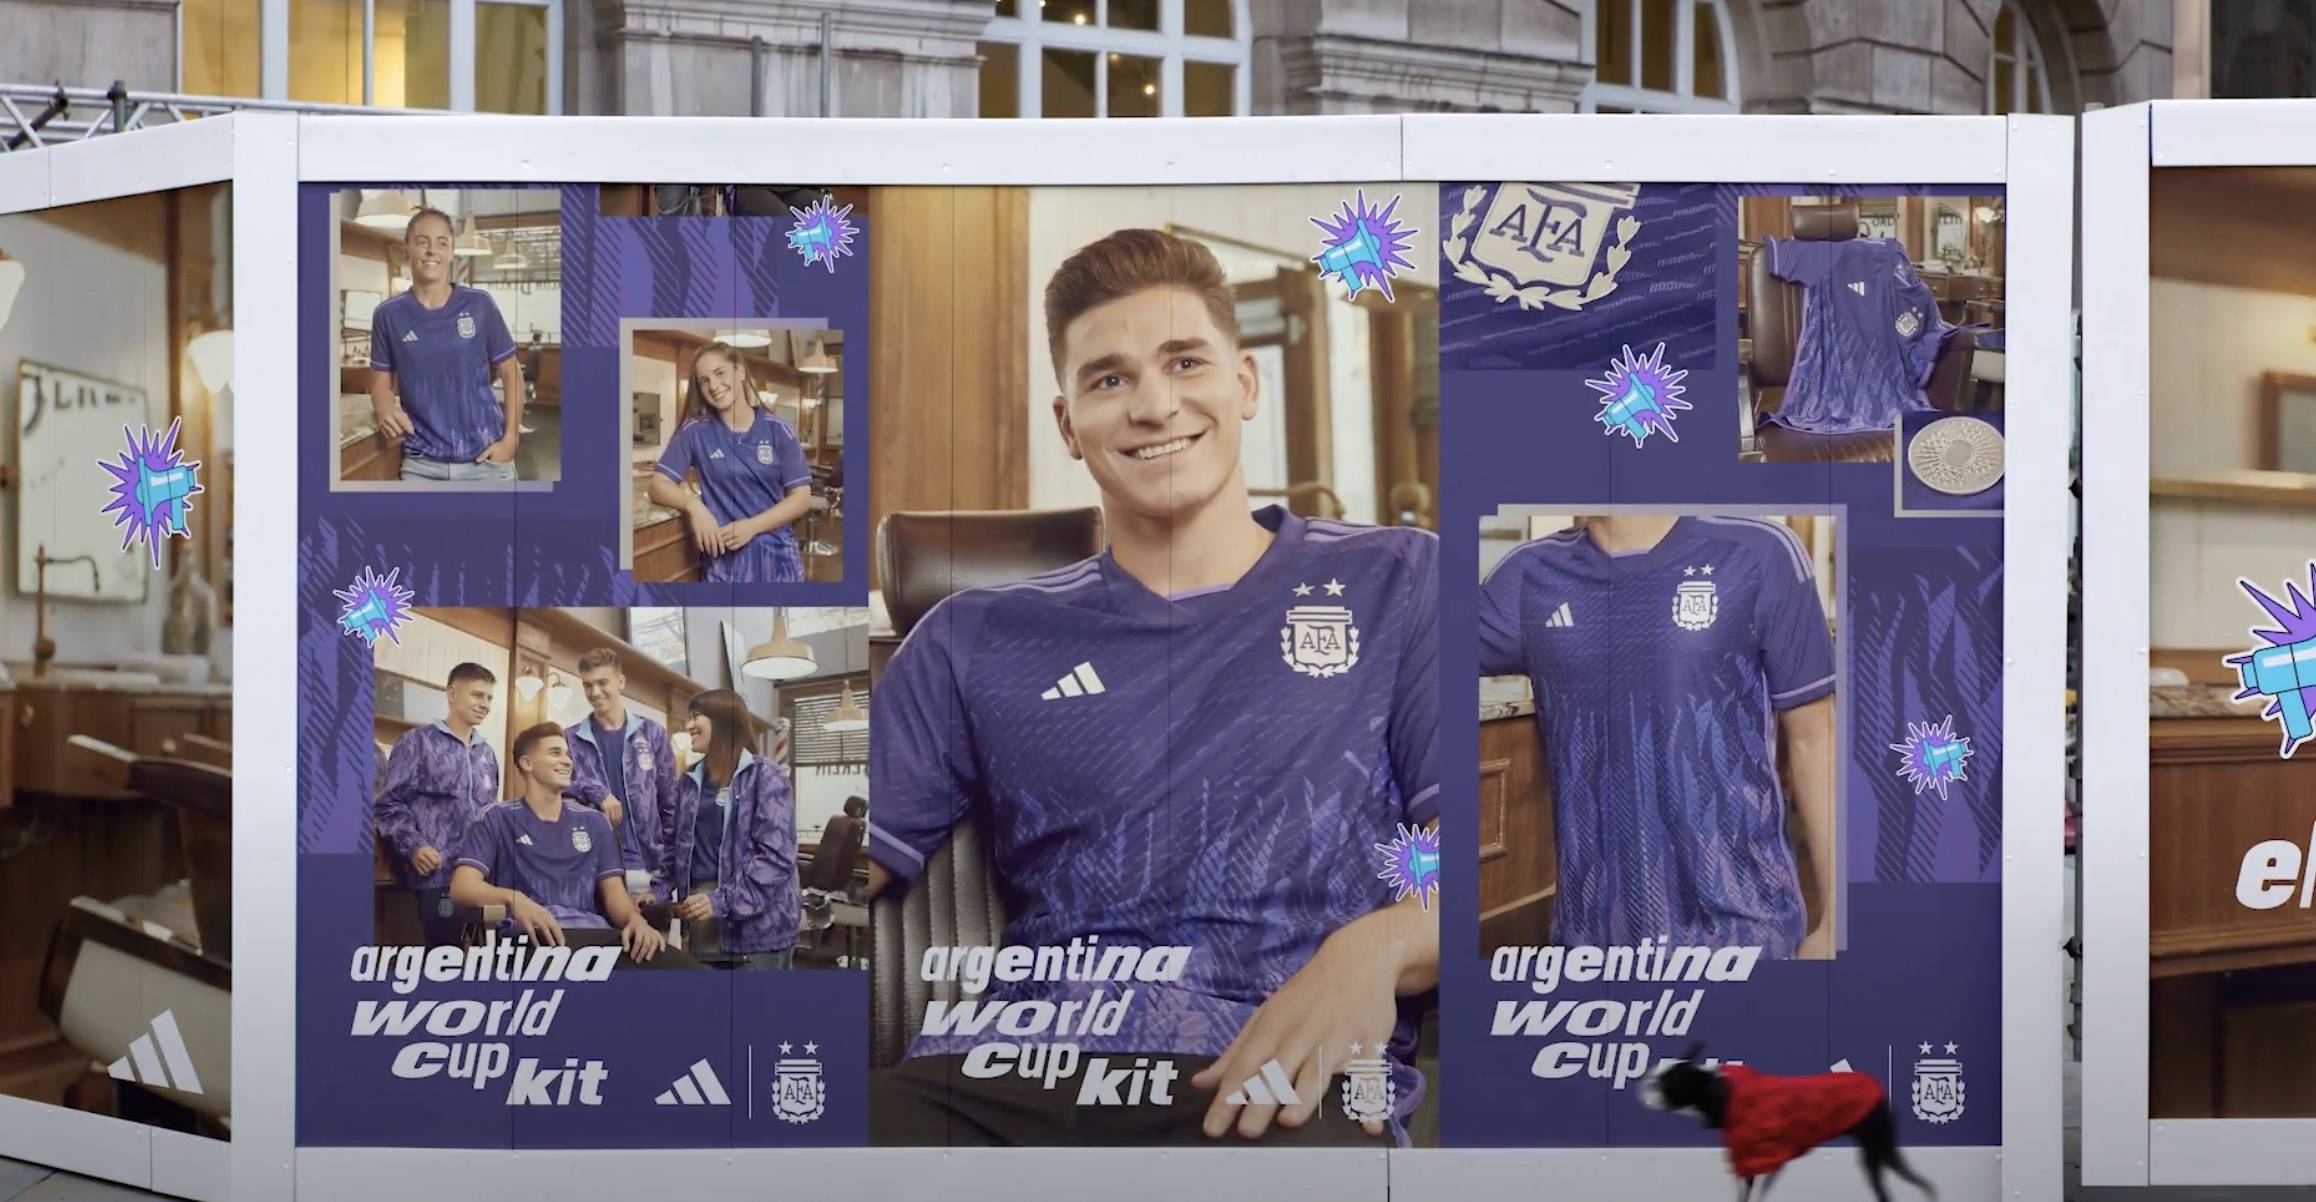 Poster of the Argentina World Cup Kit